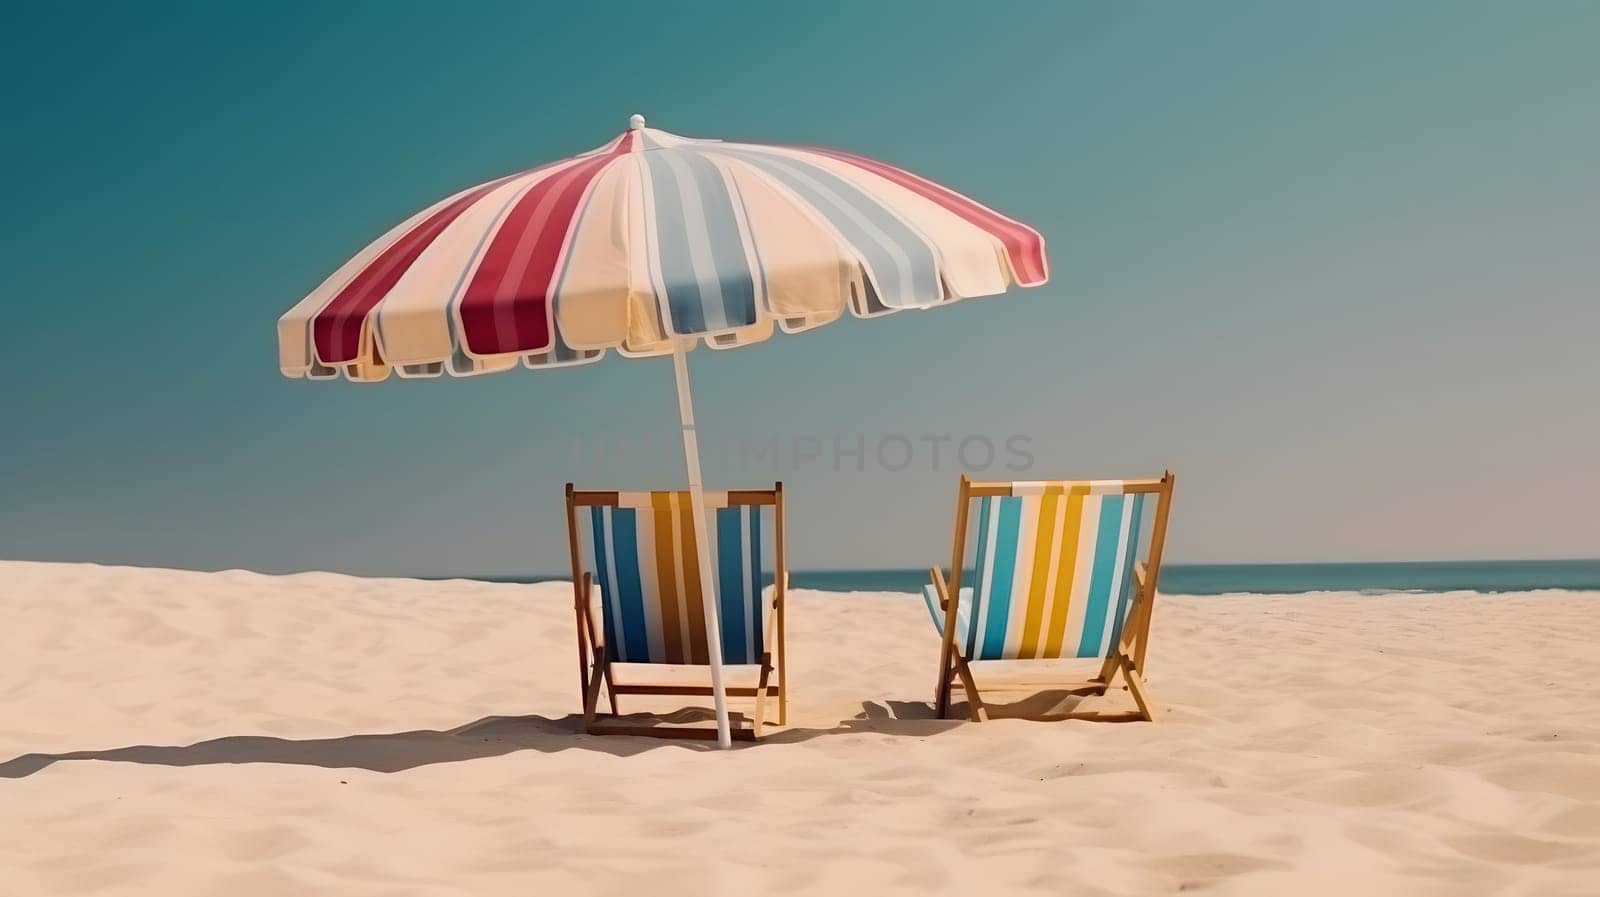 Beach umbrella with chairs on the sand beach. Neural network generated in May 2023. Not based on any actual person, scene or pattern.